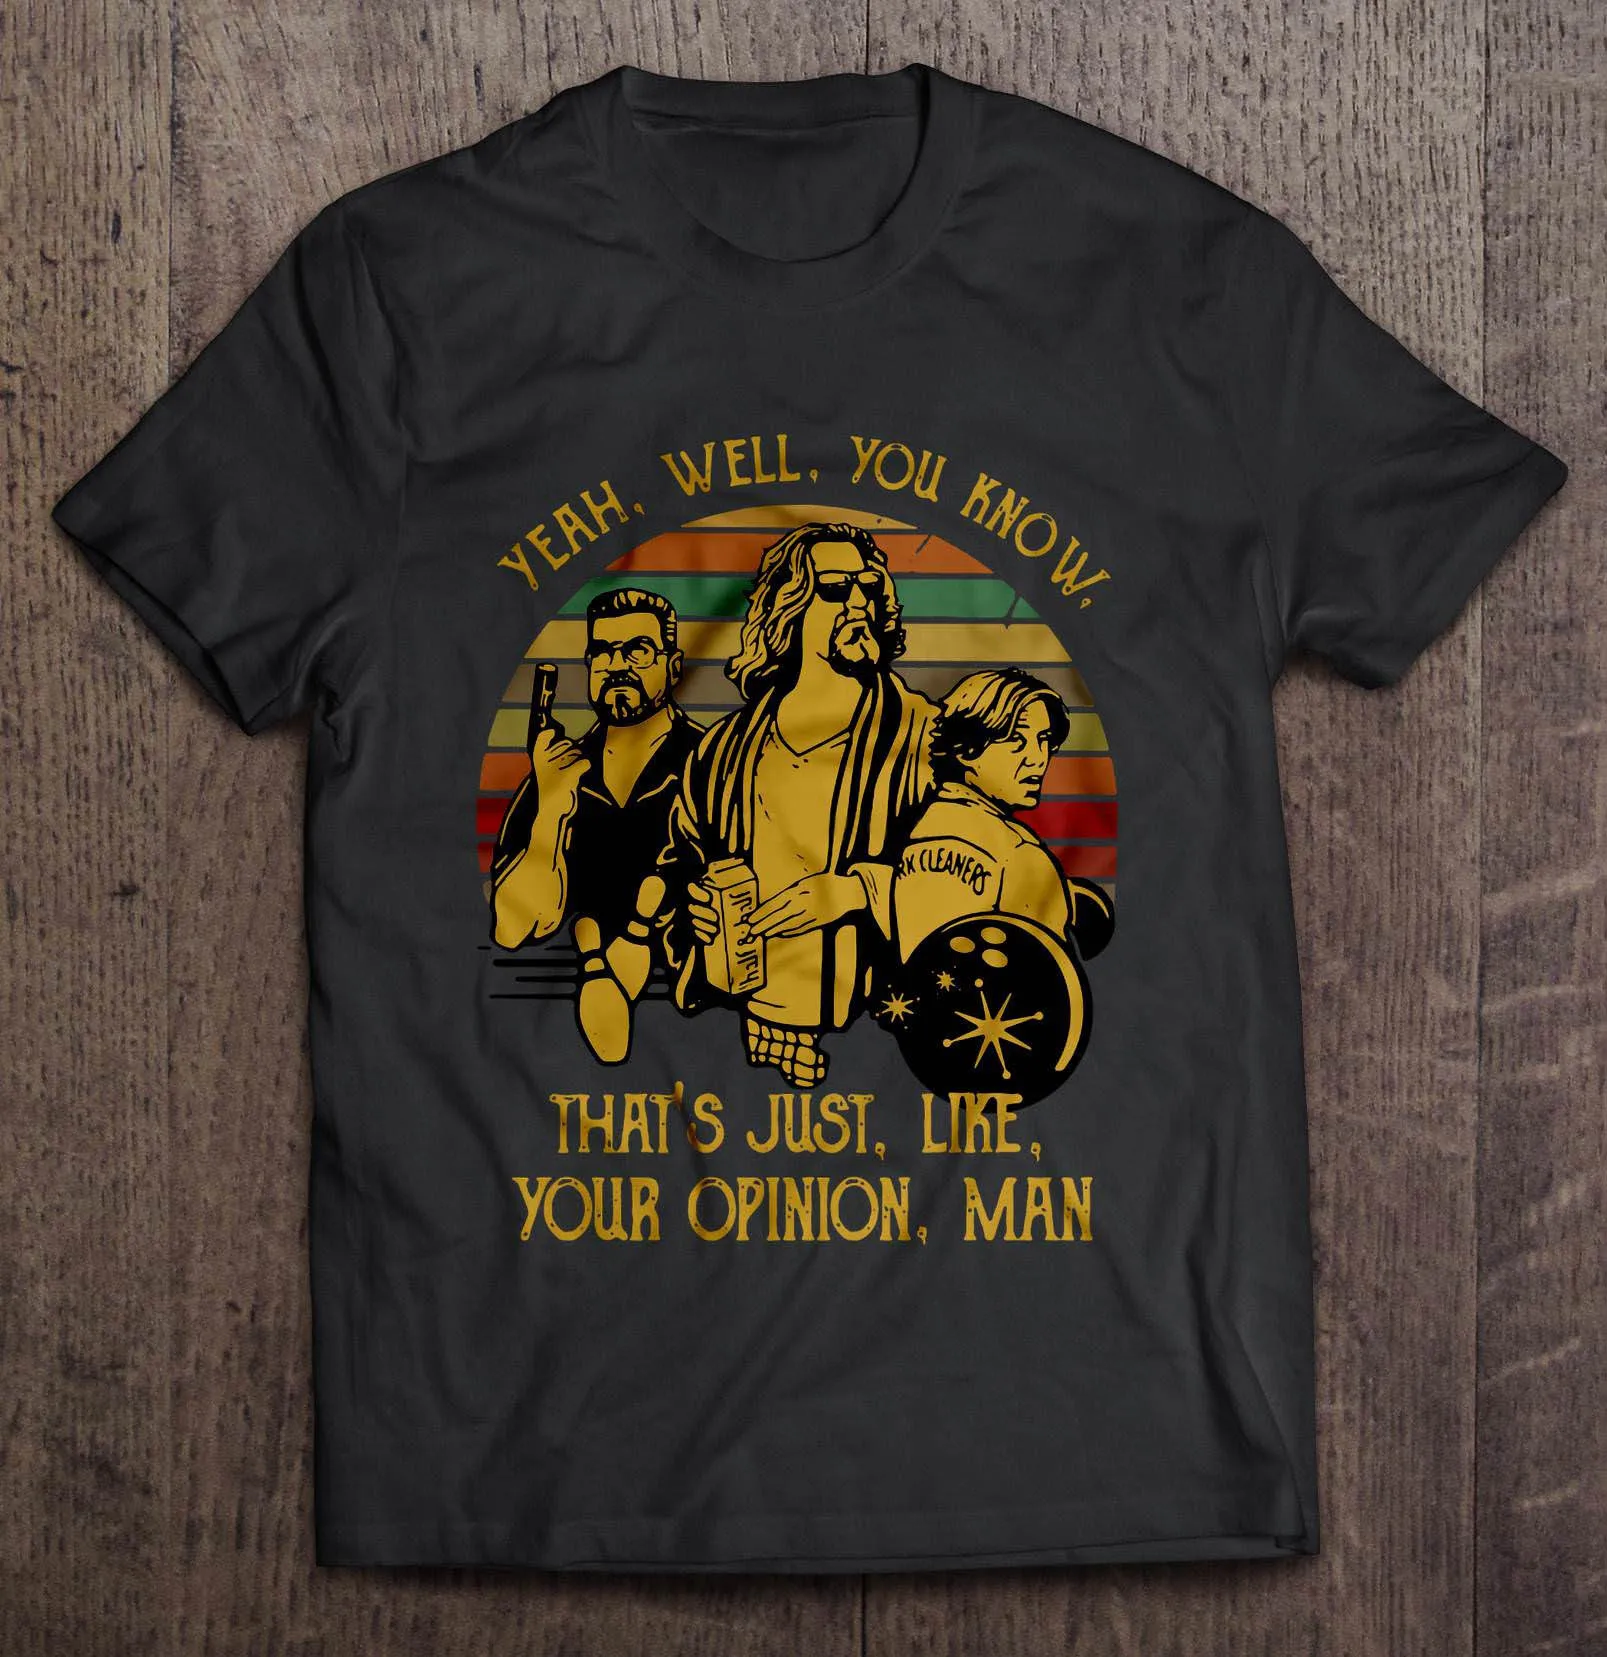 

Men Funny T Shirt Fashion tshirt Yeah Well You Know That's Just Like Your Opinion Man Vintage The Big Lebowski Women t-shirt